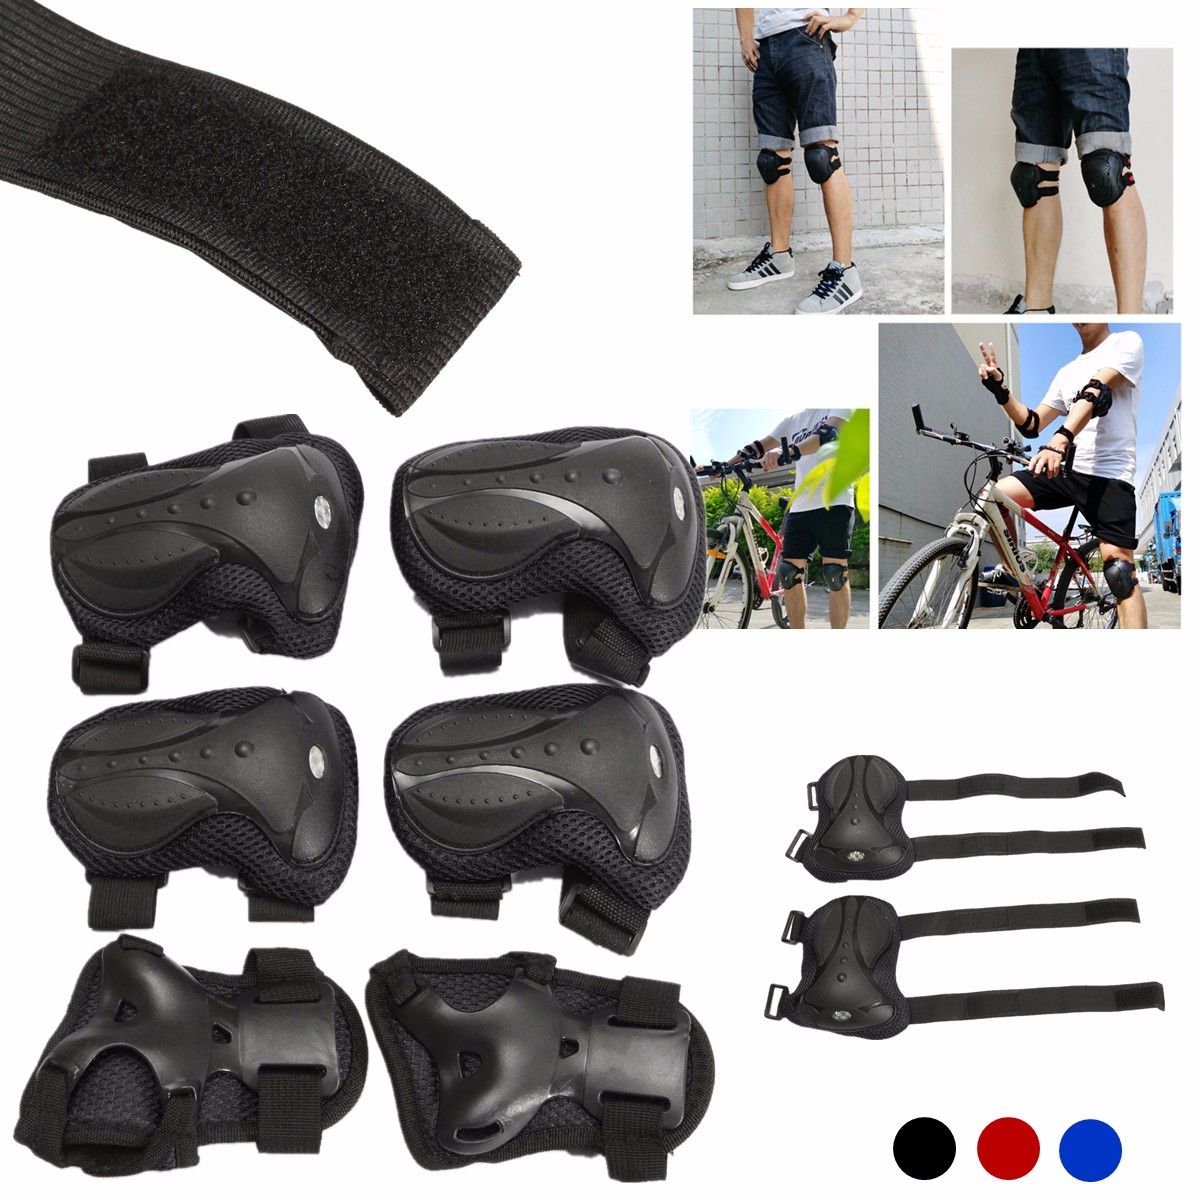 TIGERSGATE 4 Pcs Cycling Elbow and Knee Pads Protection Skating Shin Guards for Men and Women 